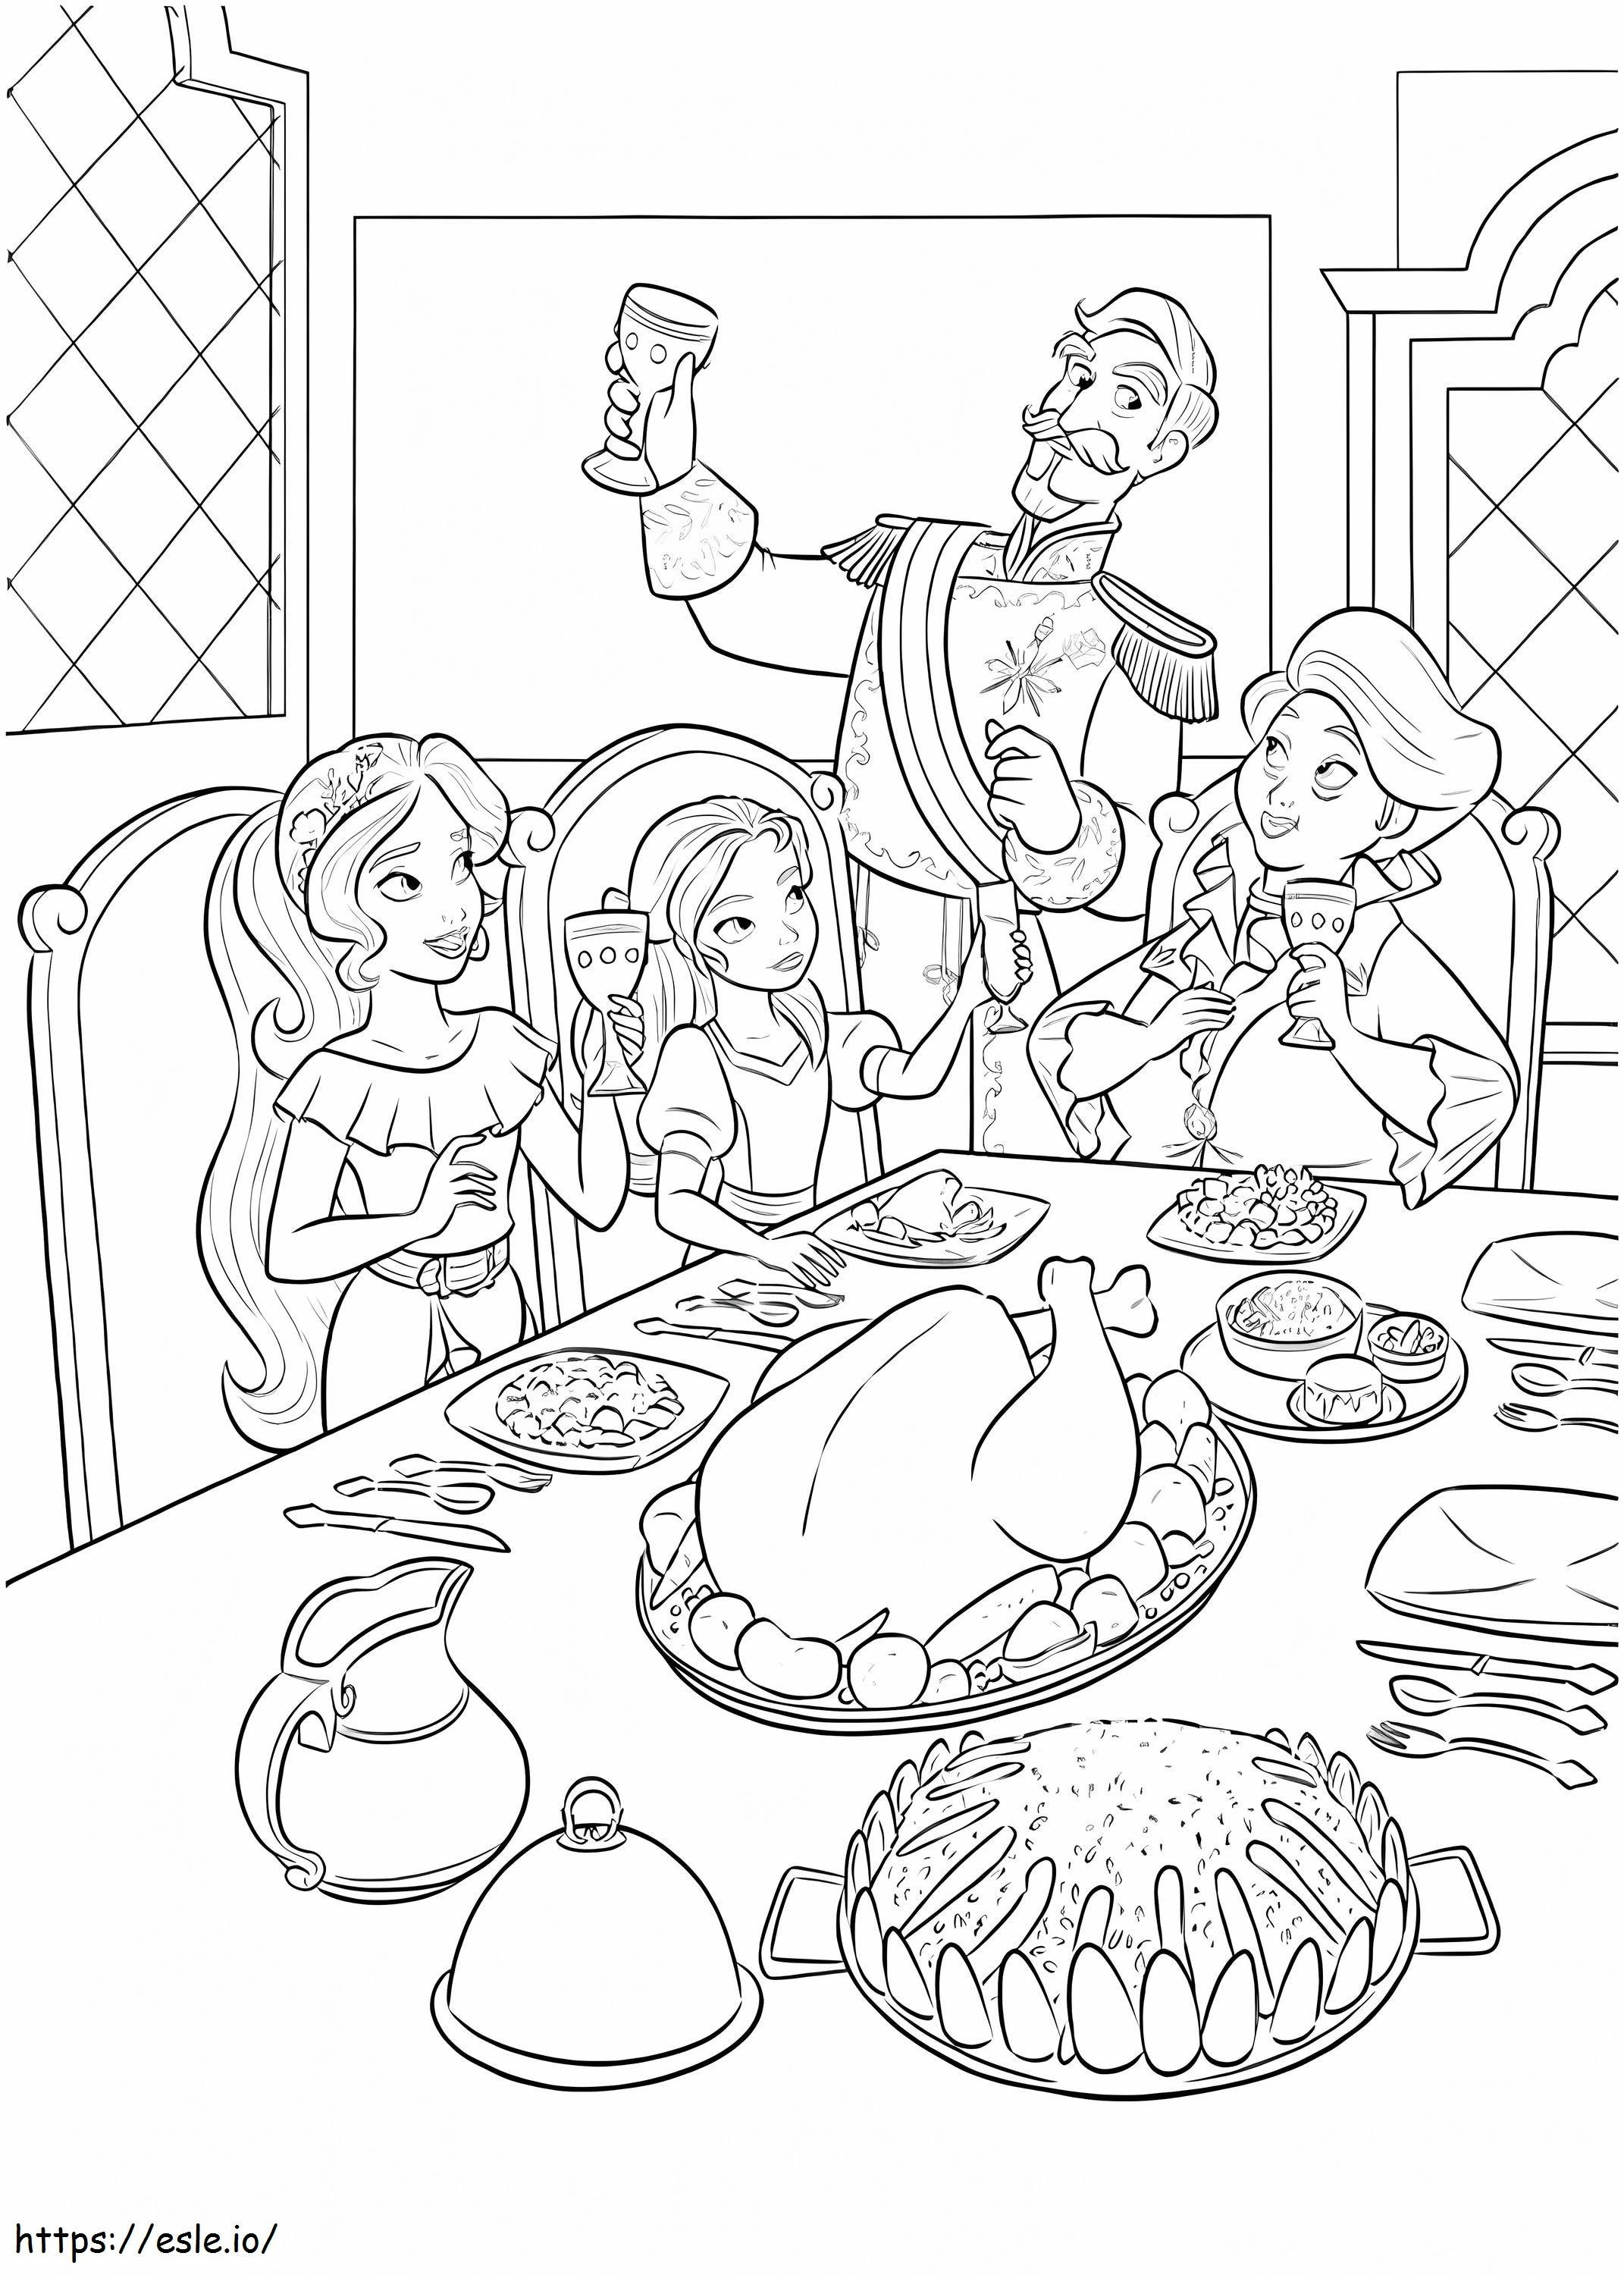 1566028943_Elena_N_Isabel_Having_Dinner A4 coloring page